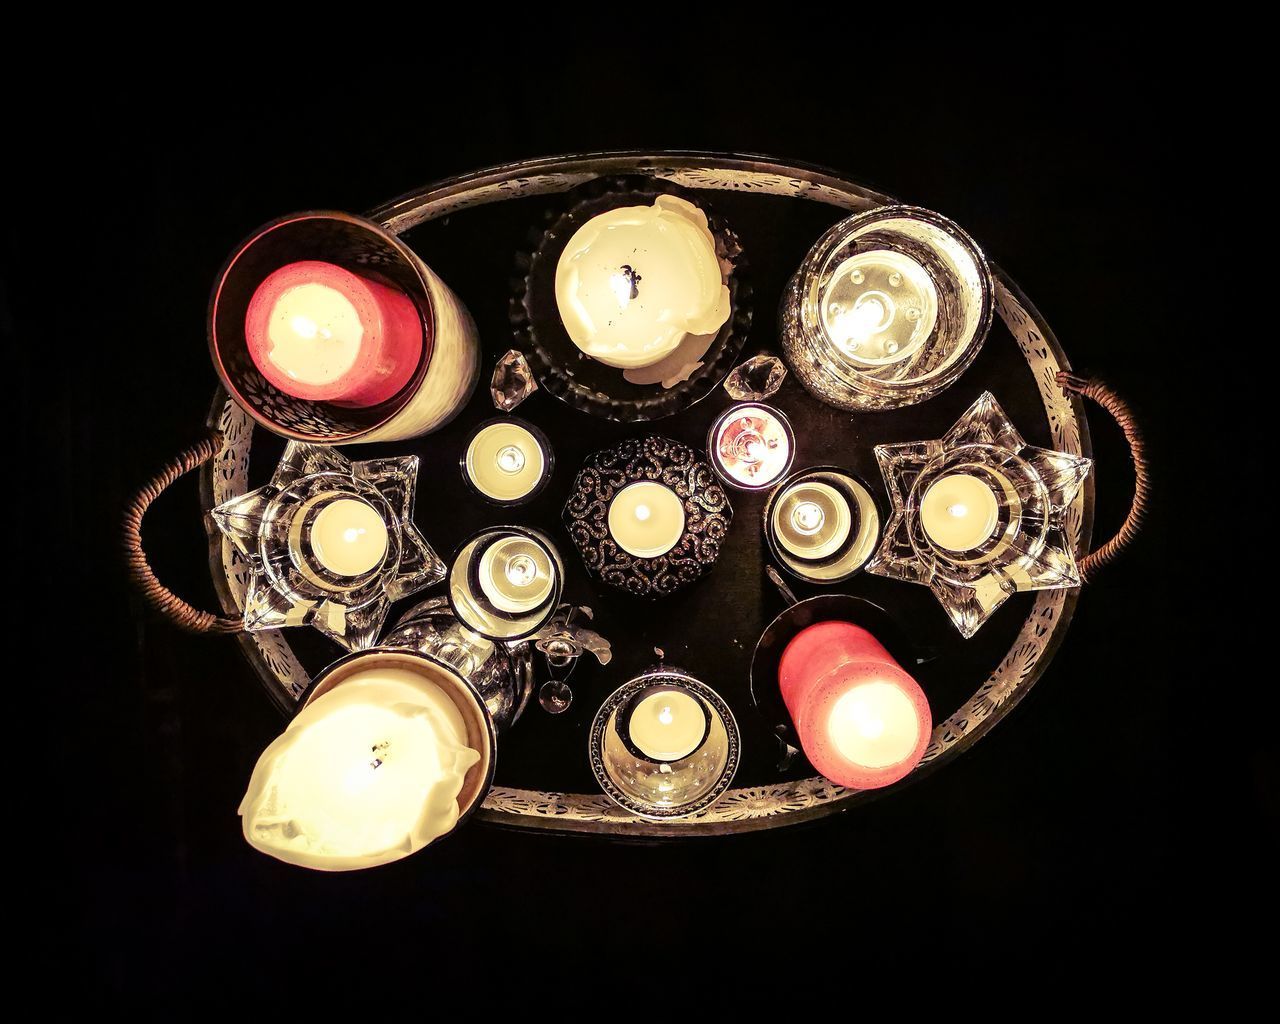 HIGH ANGLE VIEW OF ILLUMINATED ELECTRIC LAMP IN DARKROOM